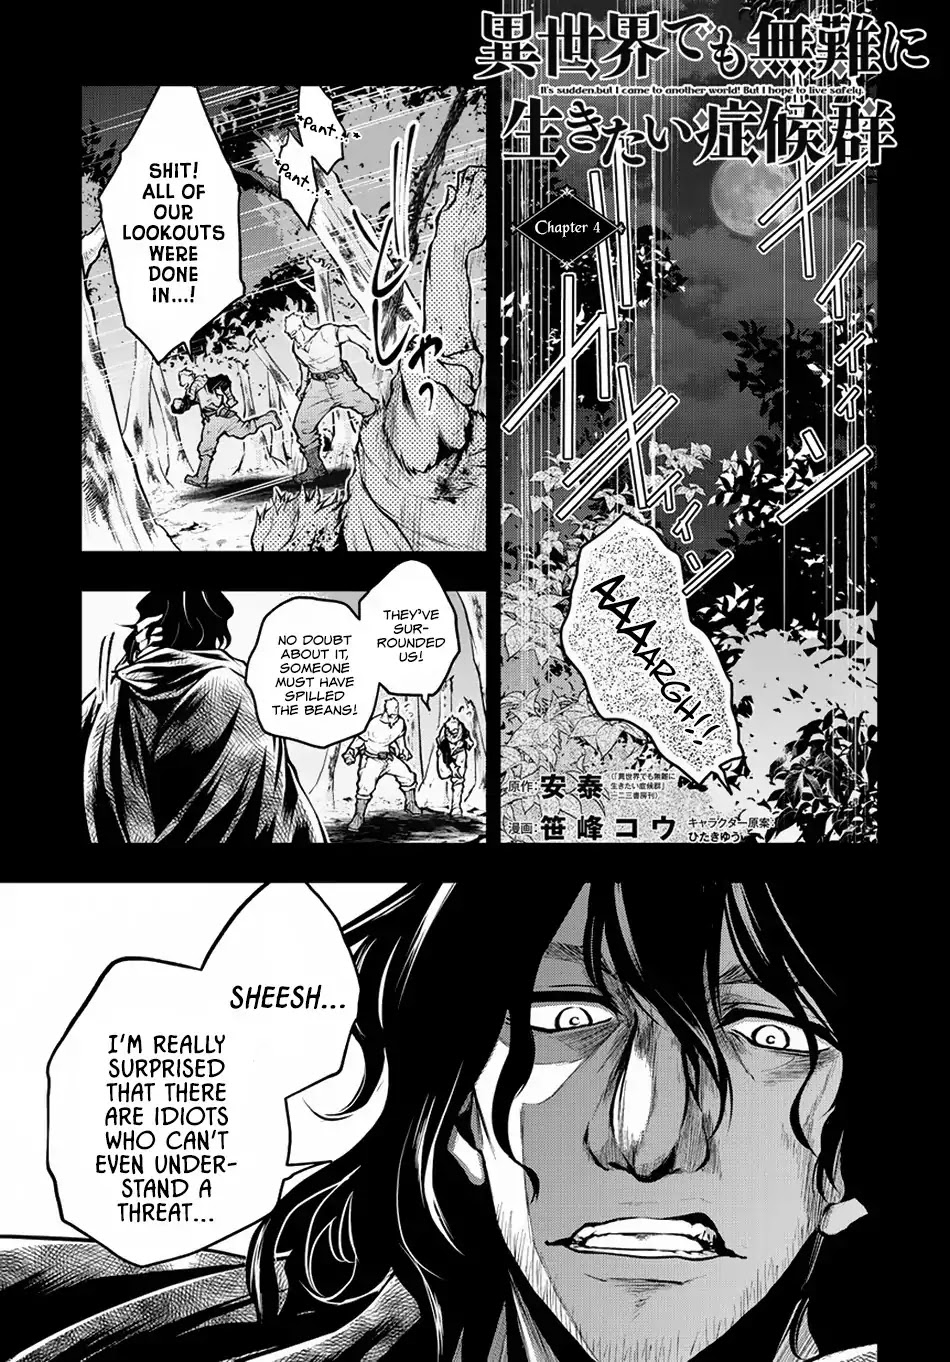 It's Sudden, But I Came To Another World! But I Hope To Live Safely Chapter 4 - Picture 2